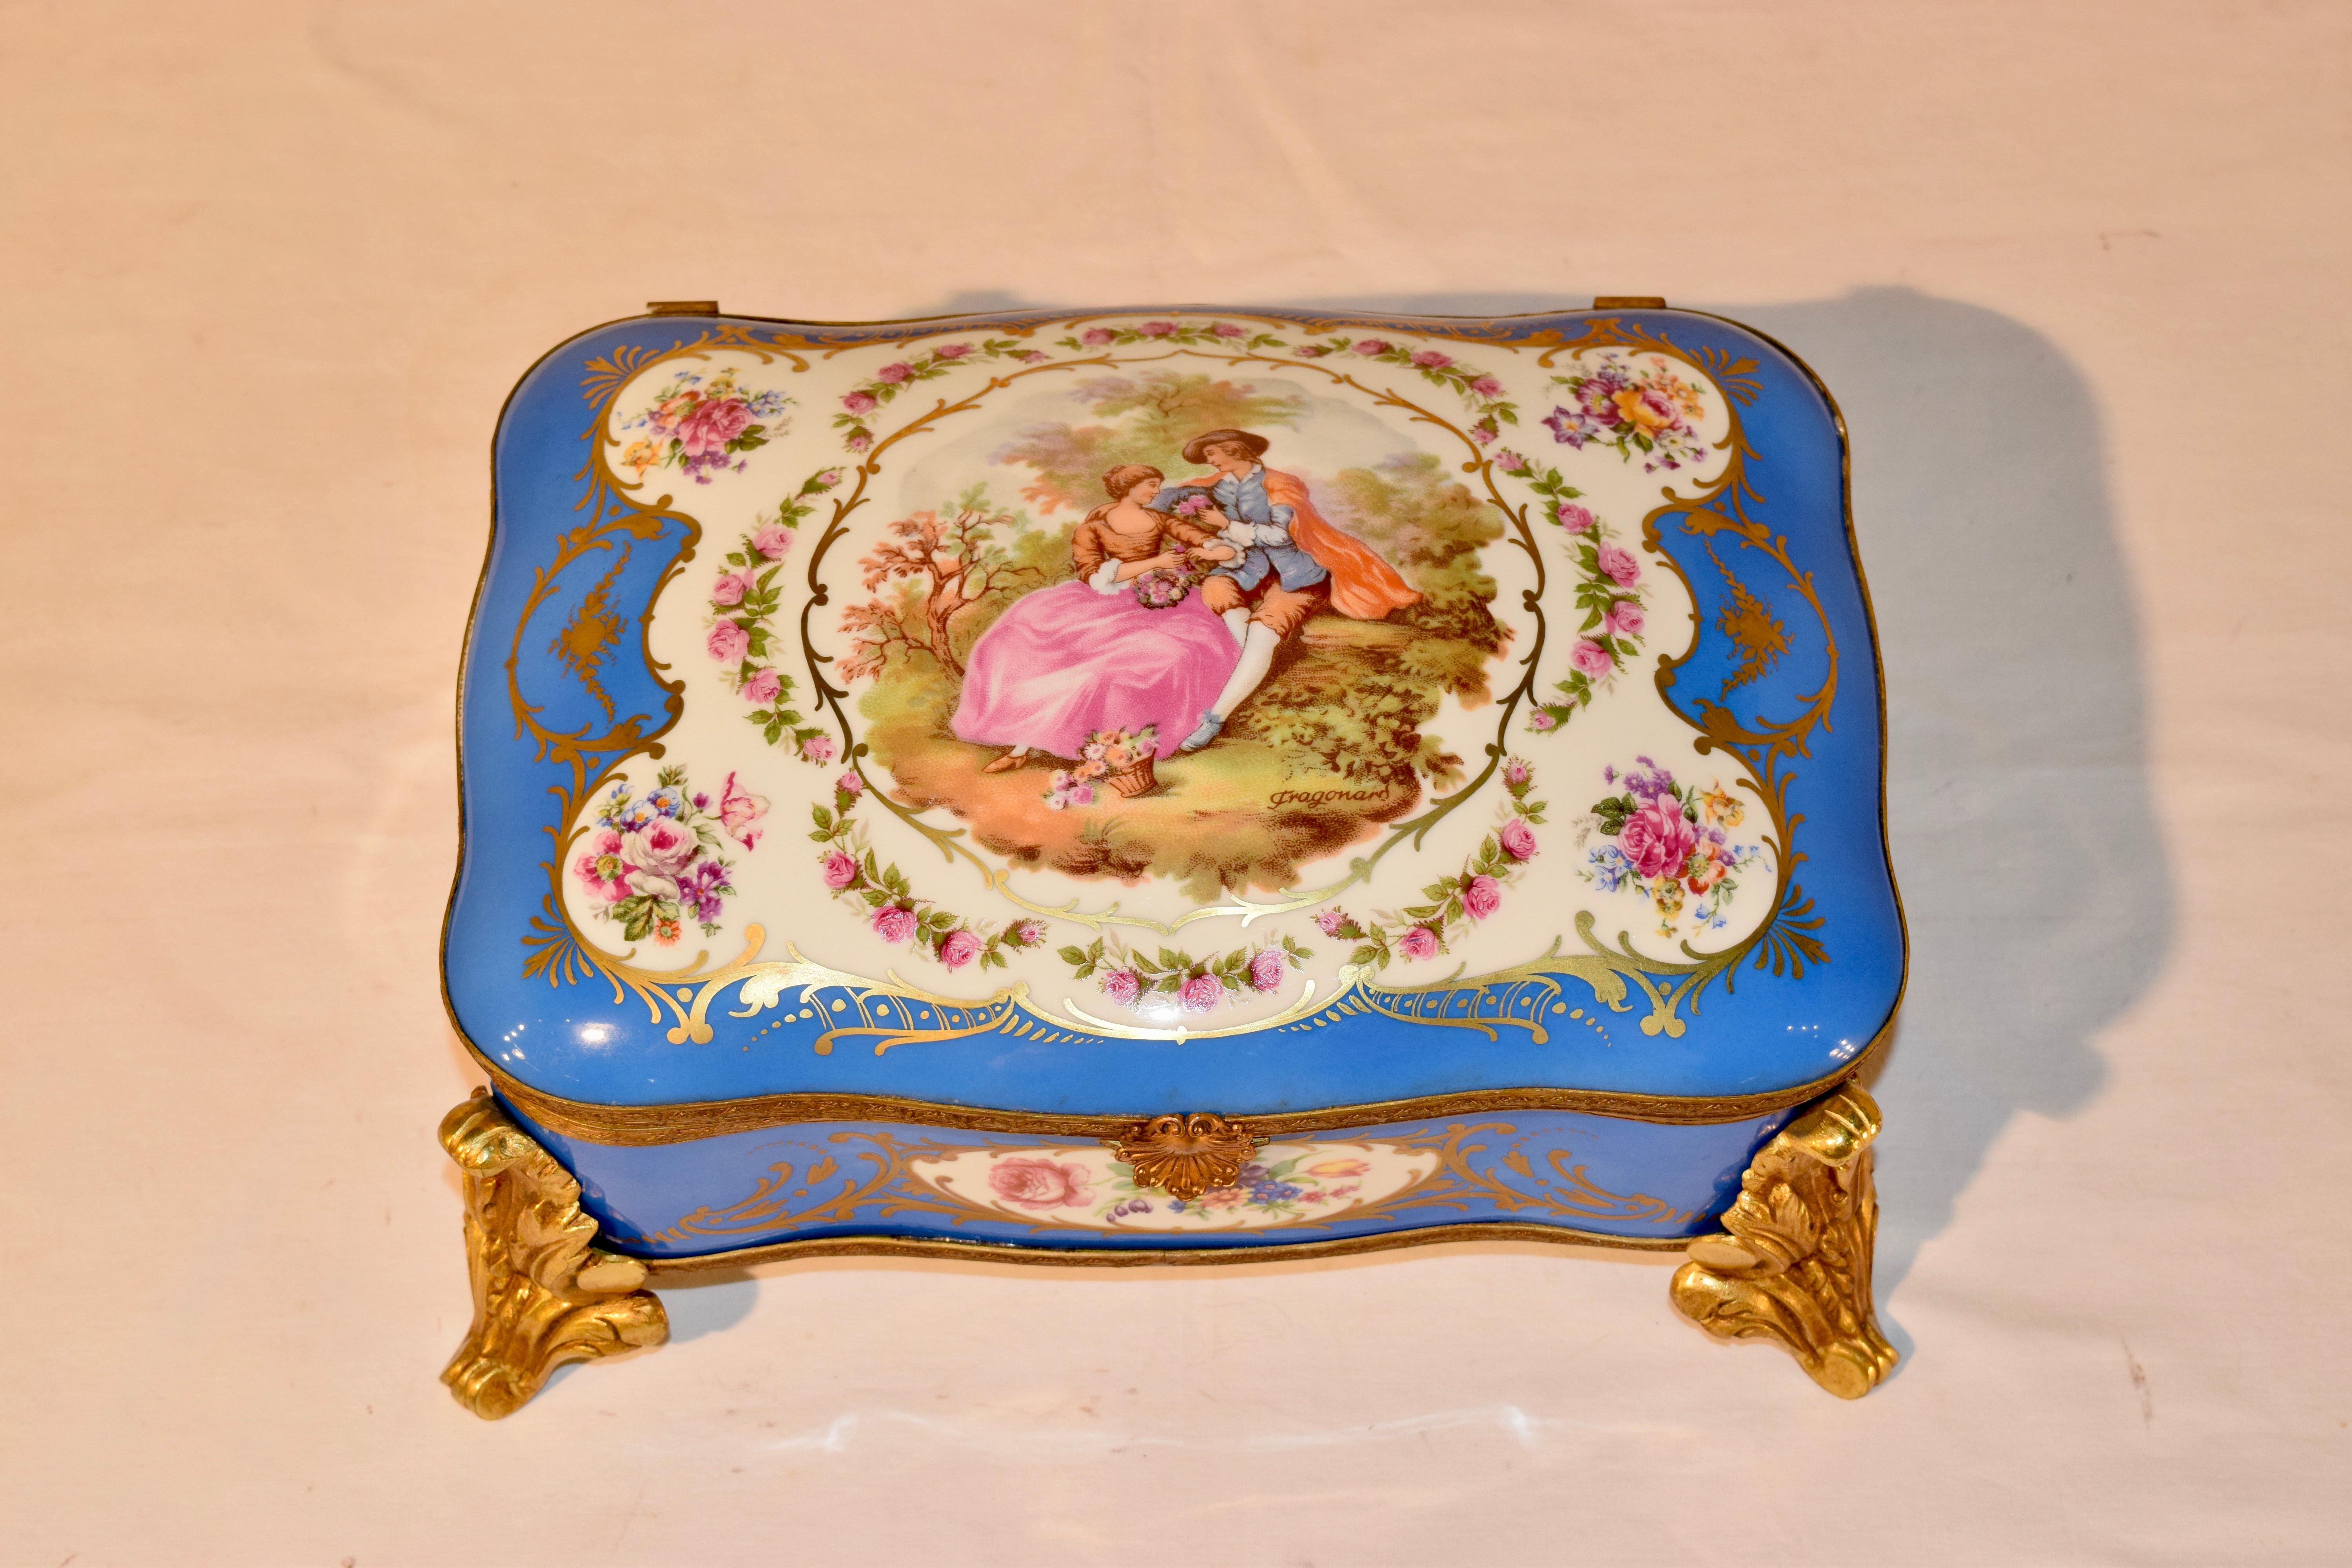 French Provincial Sevres Style Porcelain Footed Dresser Box, circa 1920 For Sale